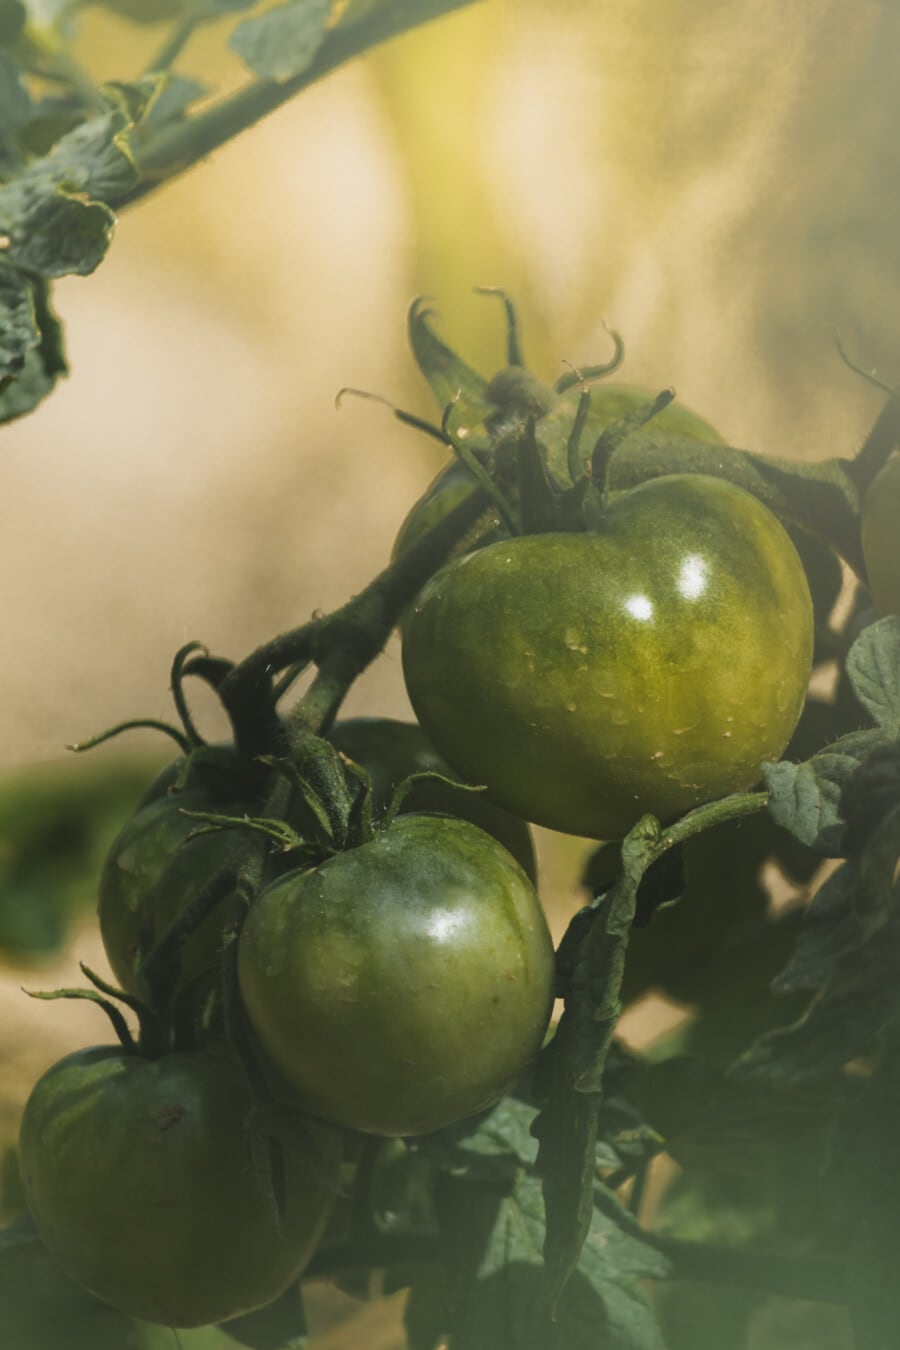 tomatoes, unripe, green, branches, organic, garden, food, nature, leaf, agriculture